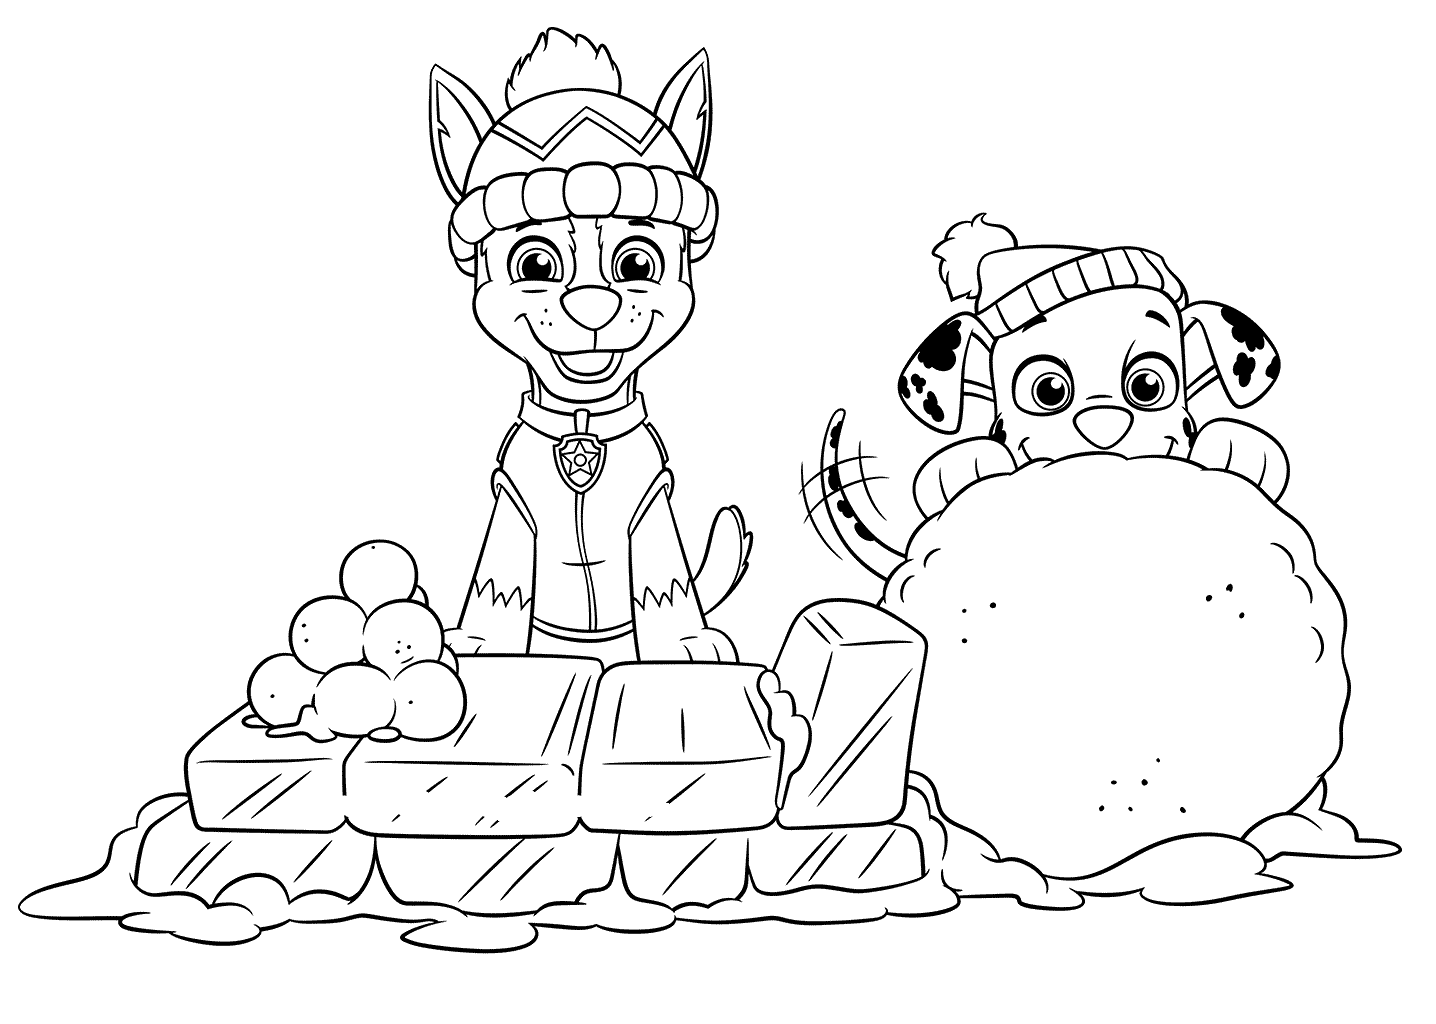 PAW Patrol Holiday Colouring Page Coloring Page